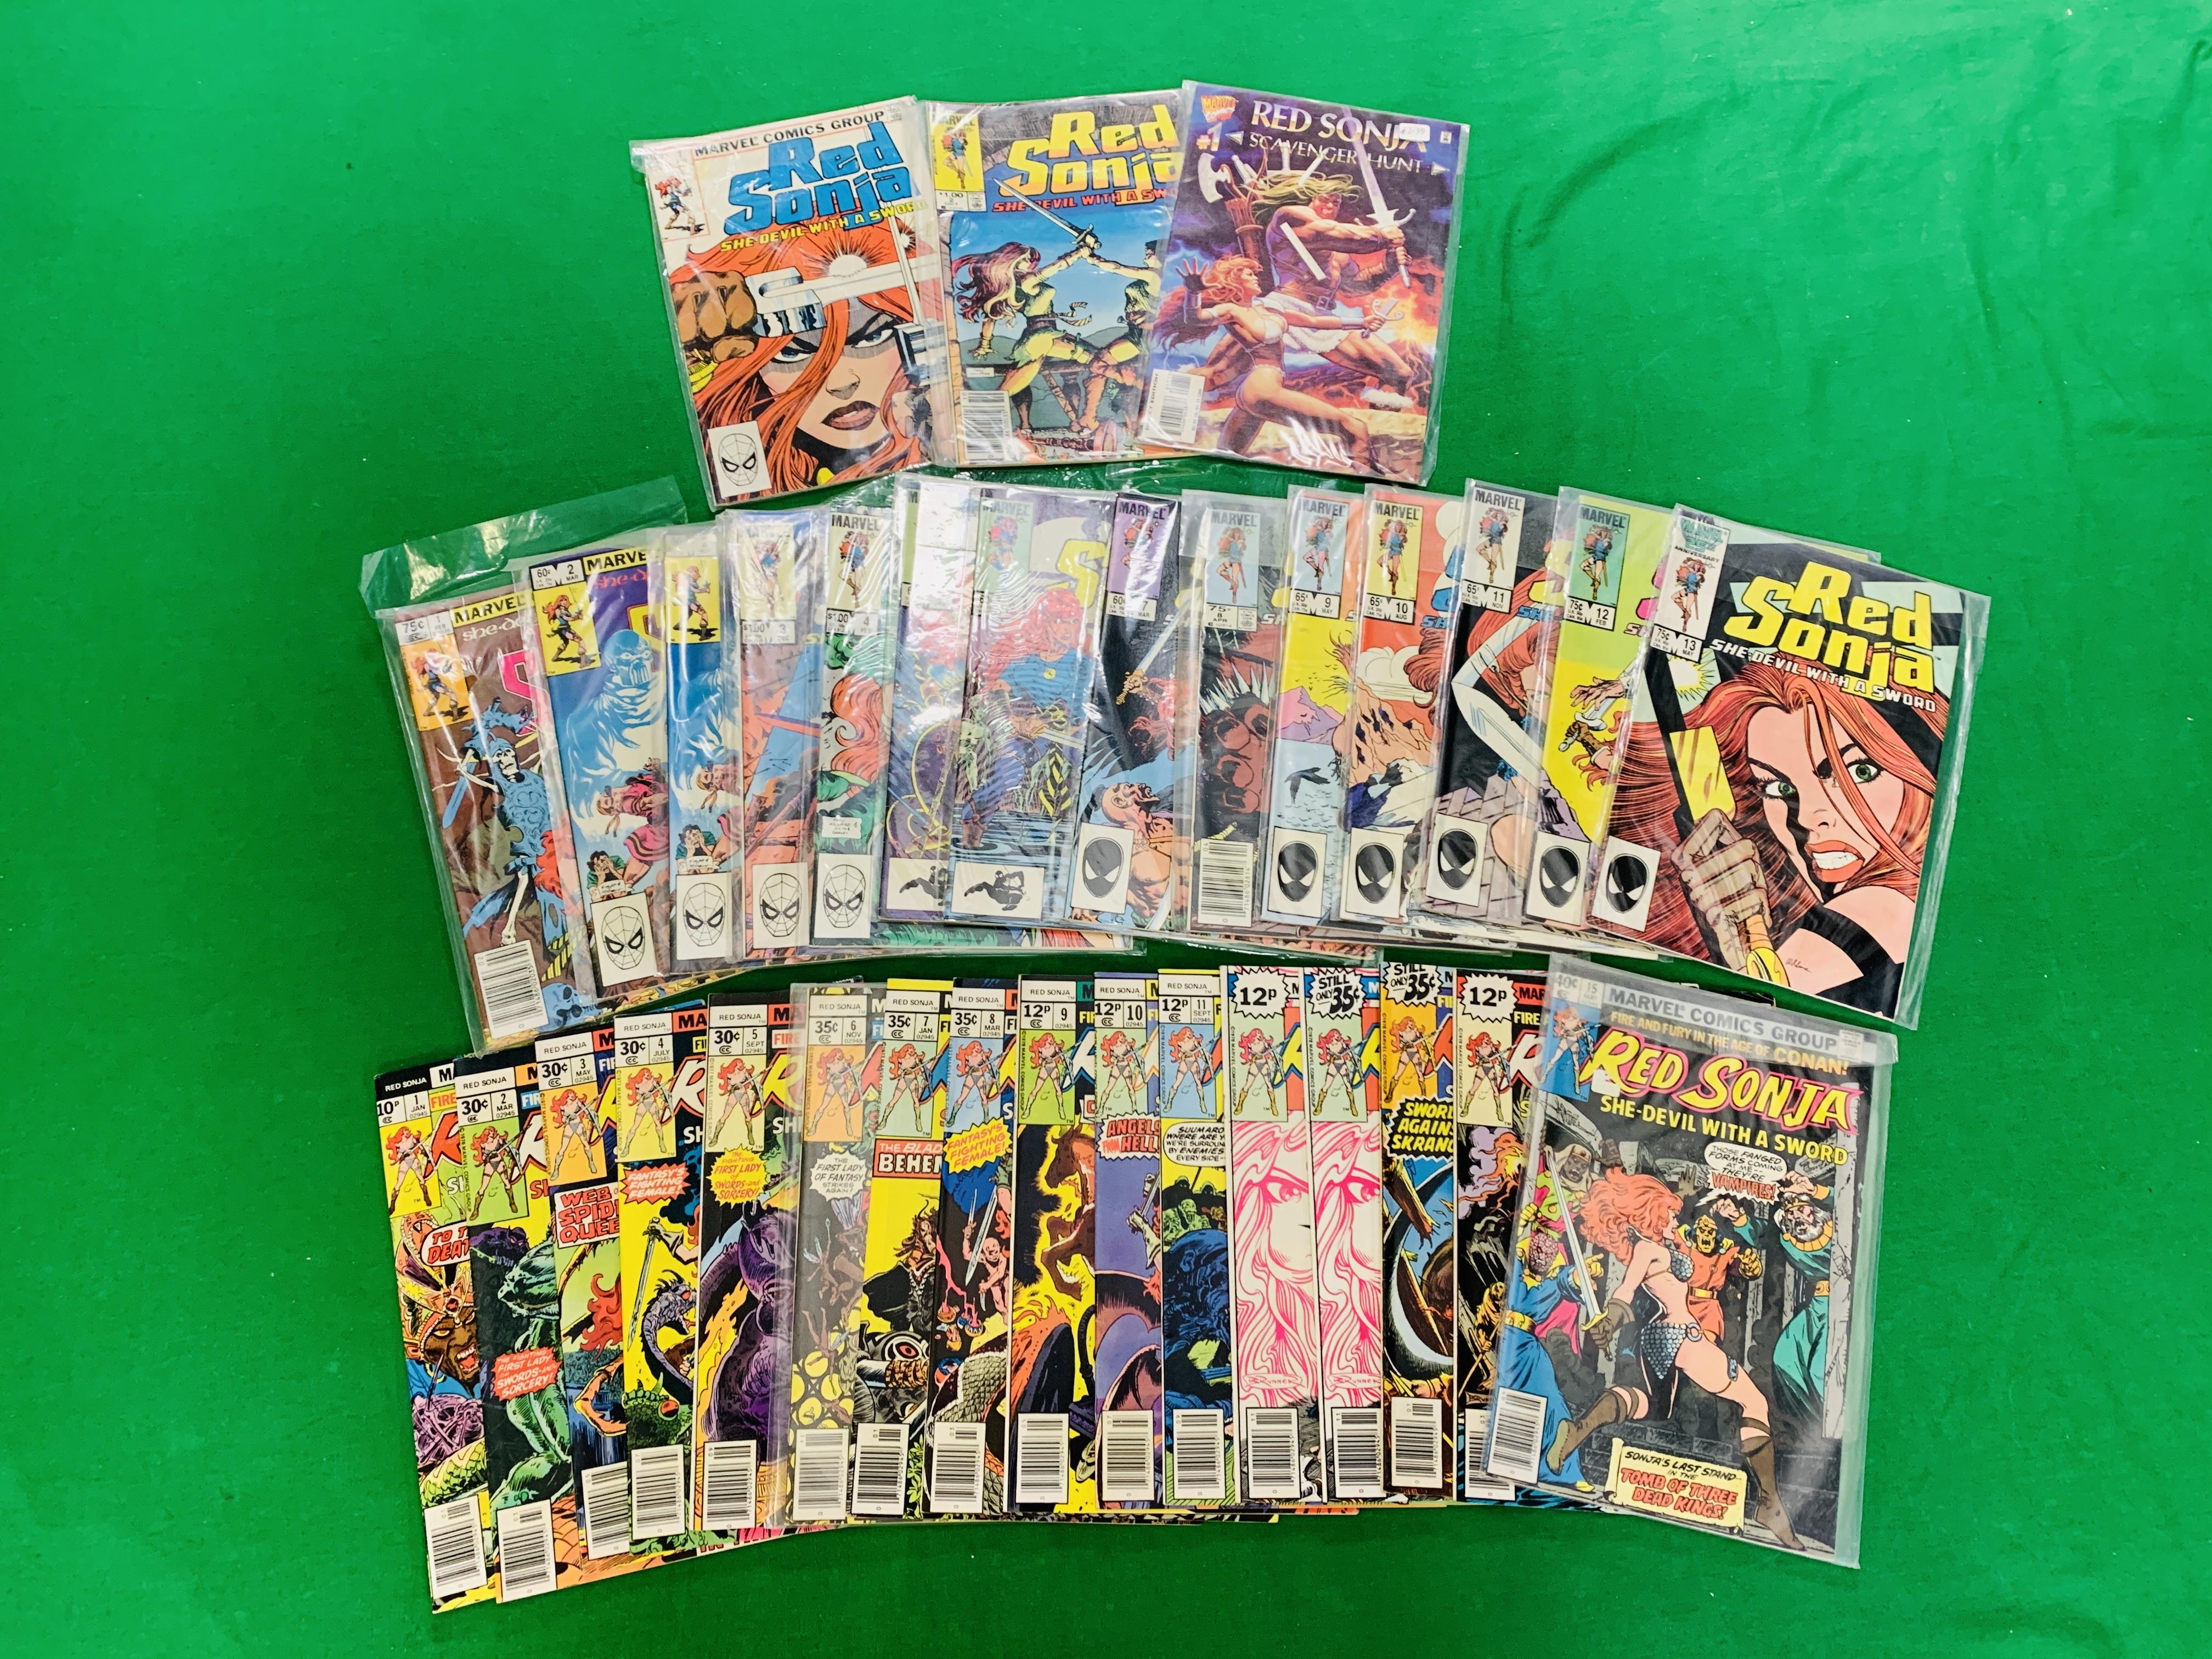 MARVEL COMICS RED SONJA NO. 1 - 15 FROM 1977 AND NO. 1 - 13 FROM 1983, INCLUDING OTHER APPEARANCES.